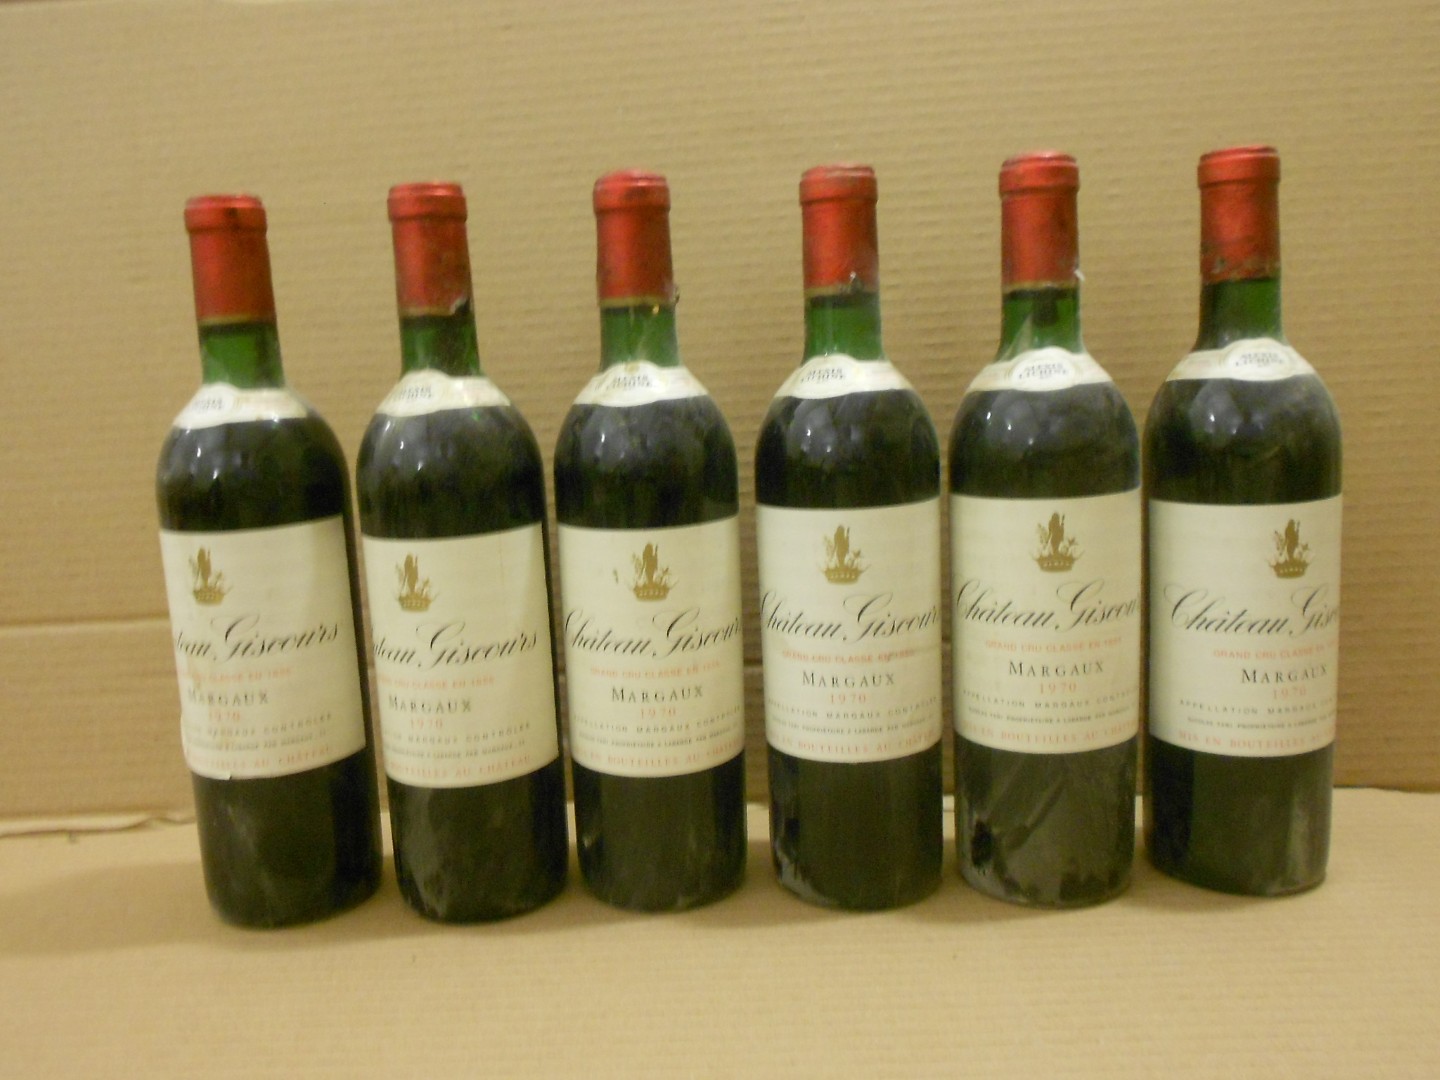 Chateau Giscours, Margaux 3eme Cru 1970, twelve bottles. Removed from a college cellar